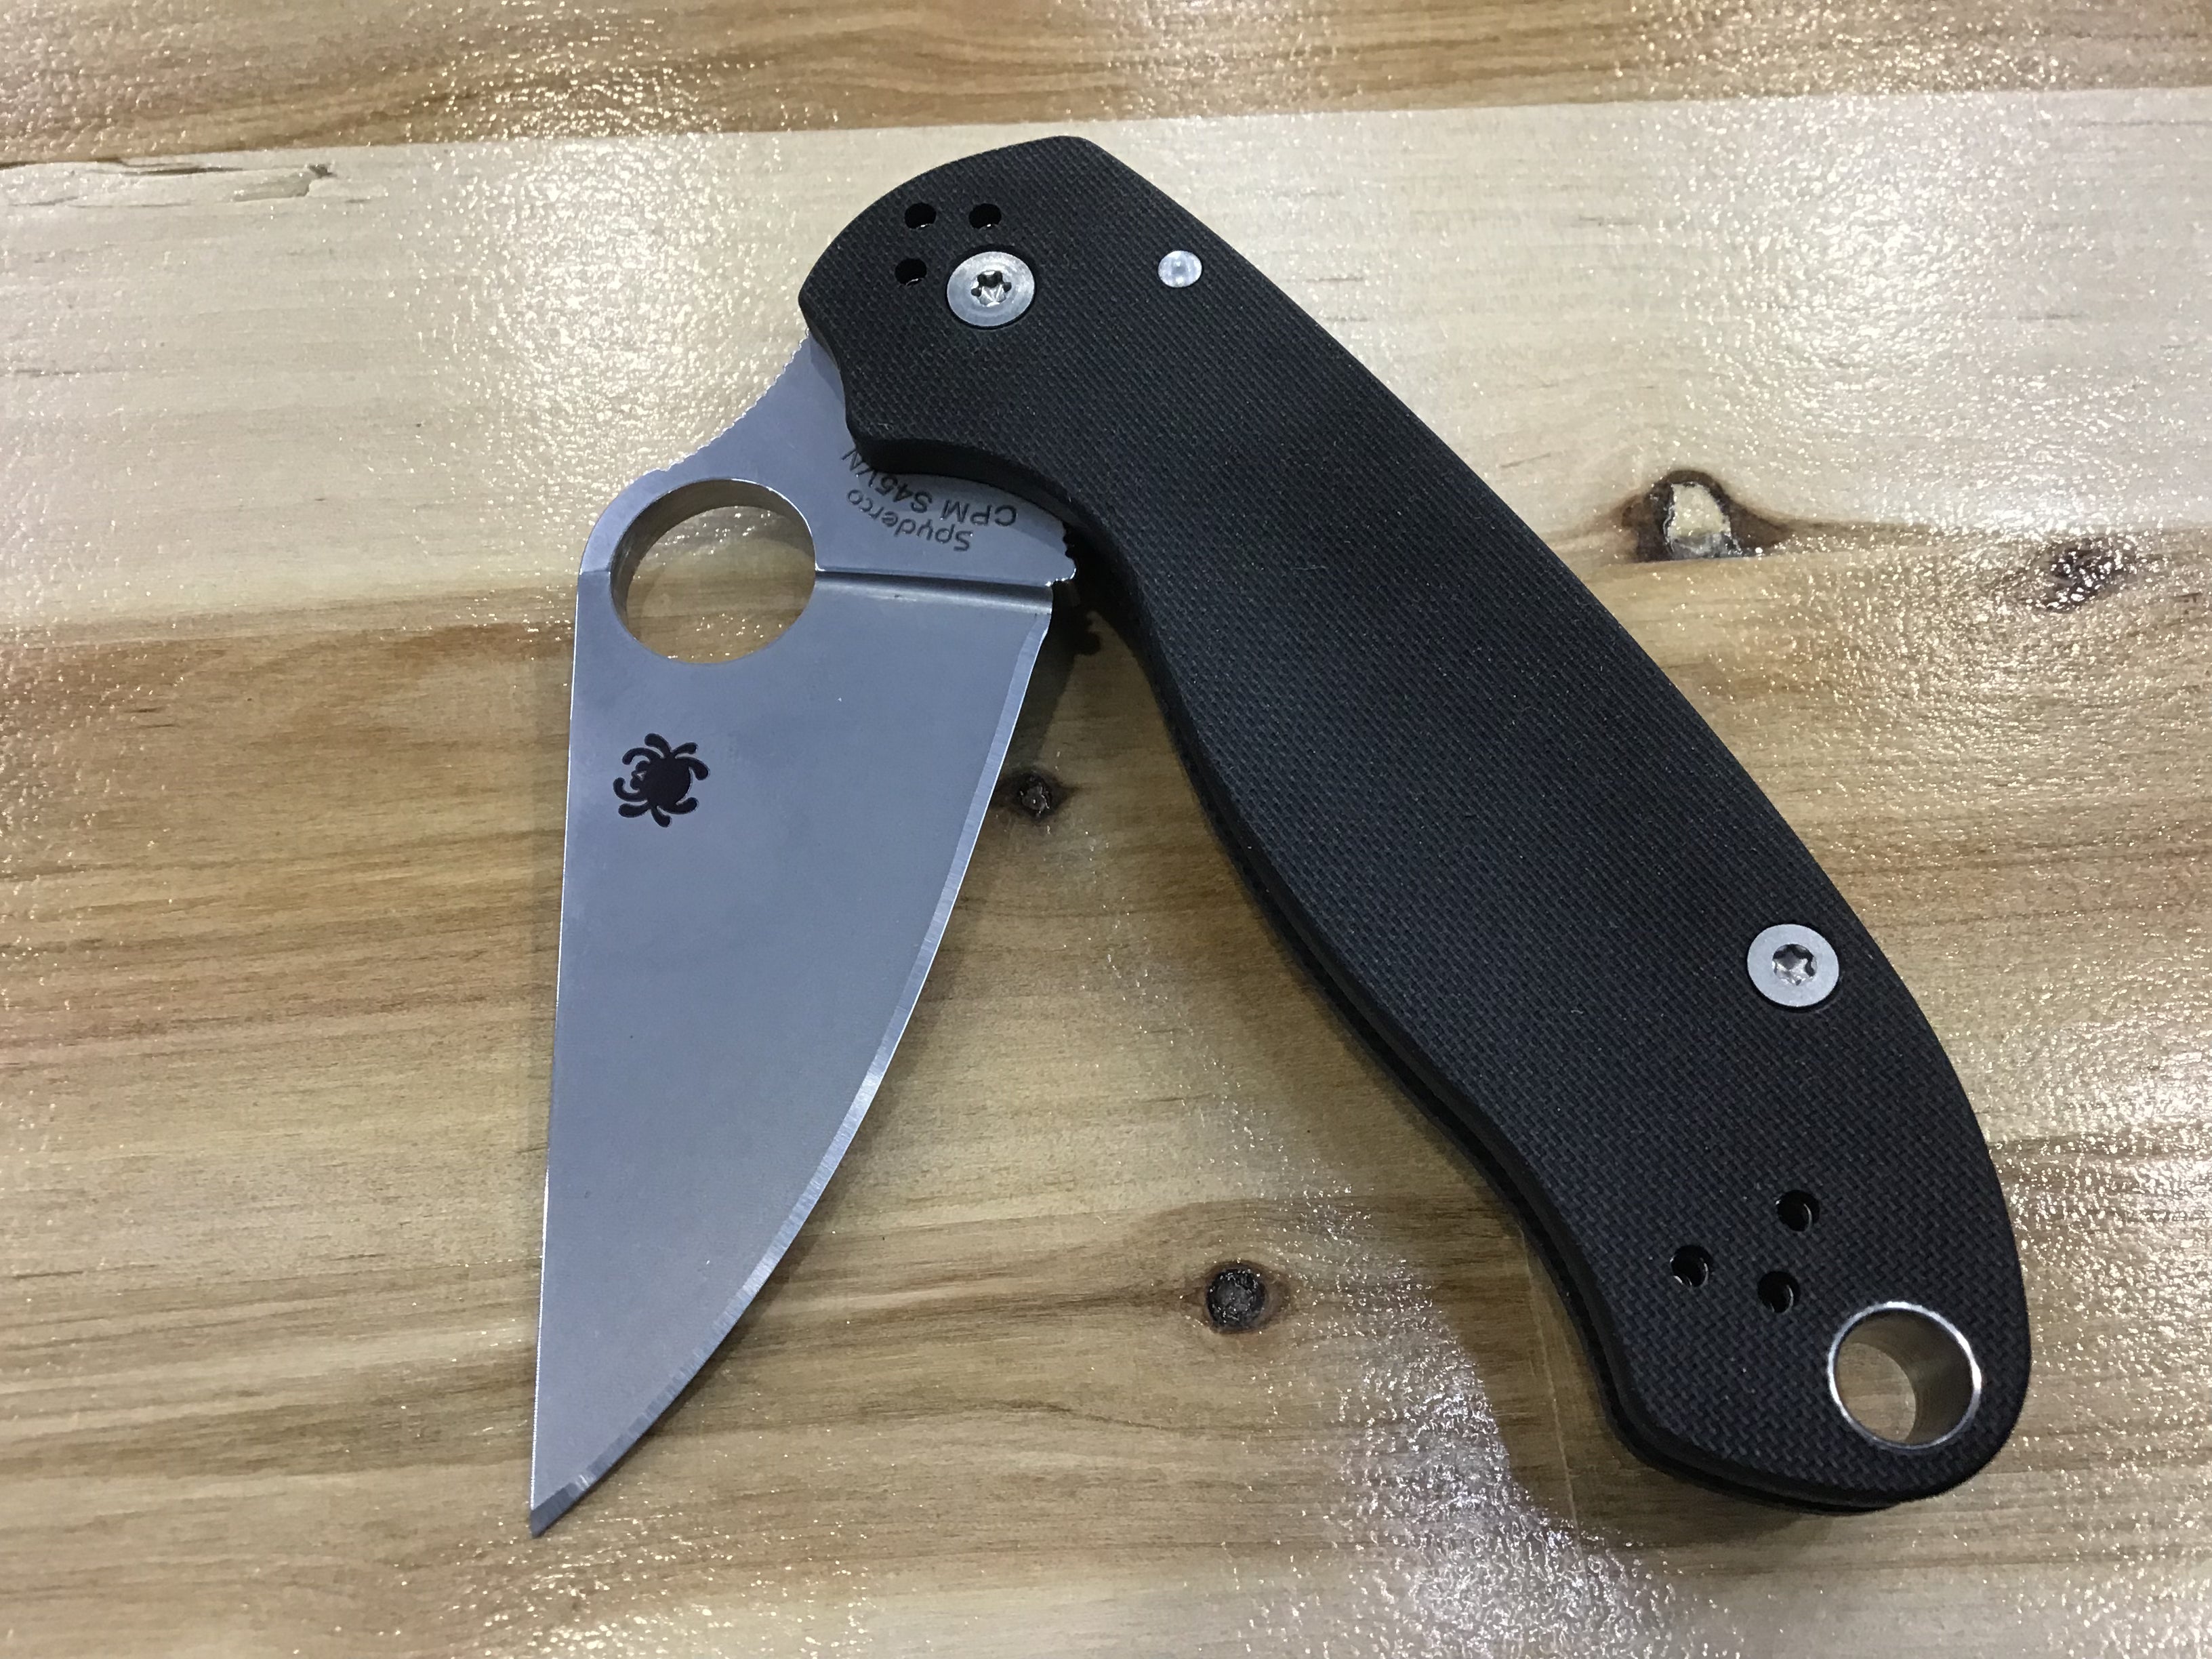 Spyderco Para 3 With Black G10 in CPM S45VN steel & Compression Lock